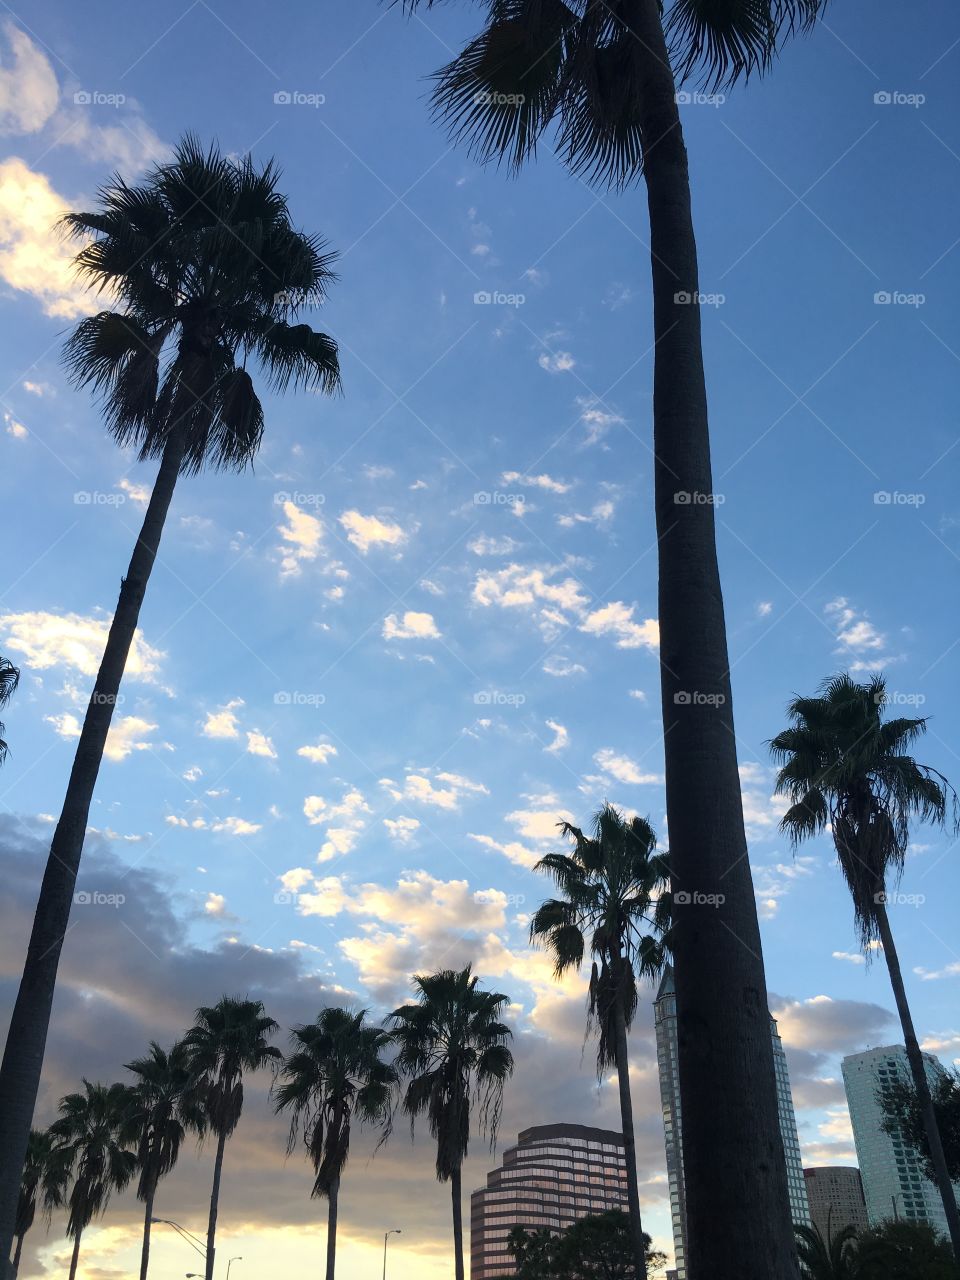 palm trees and clouds